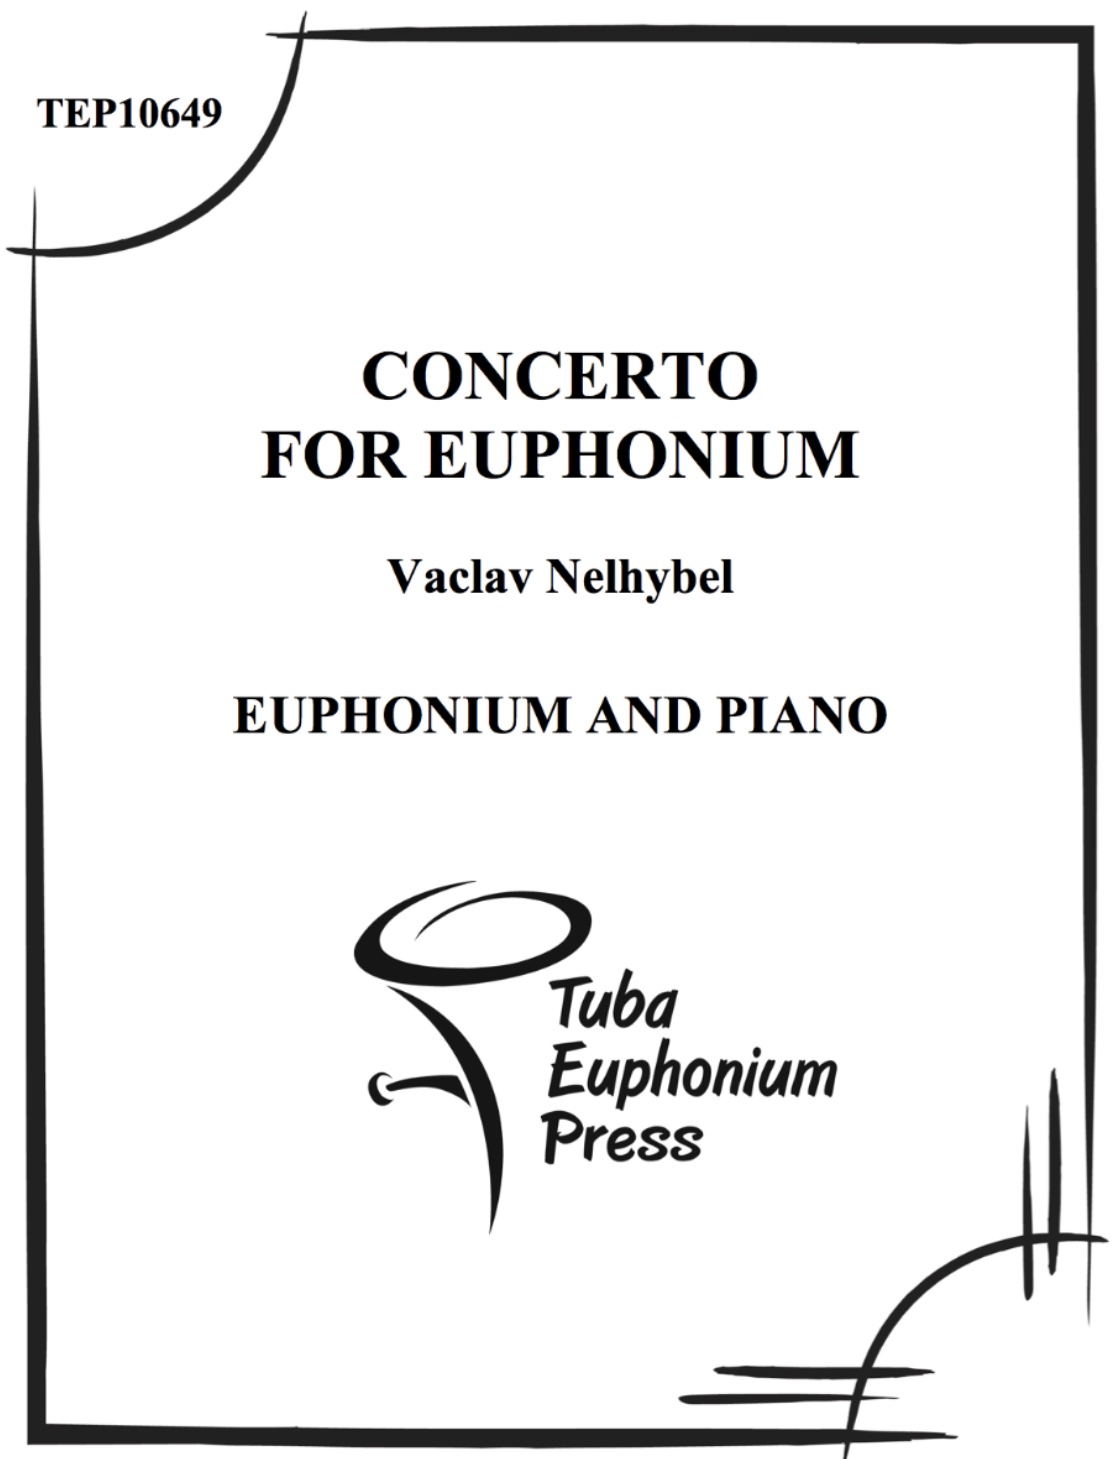 Concerto for Euphonium - Vaclav Nehybel - Euphonium and Piano (Bass clef only)